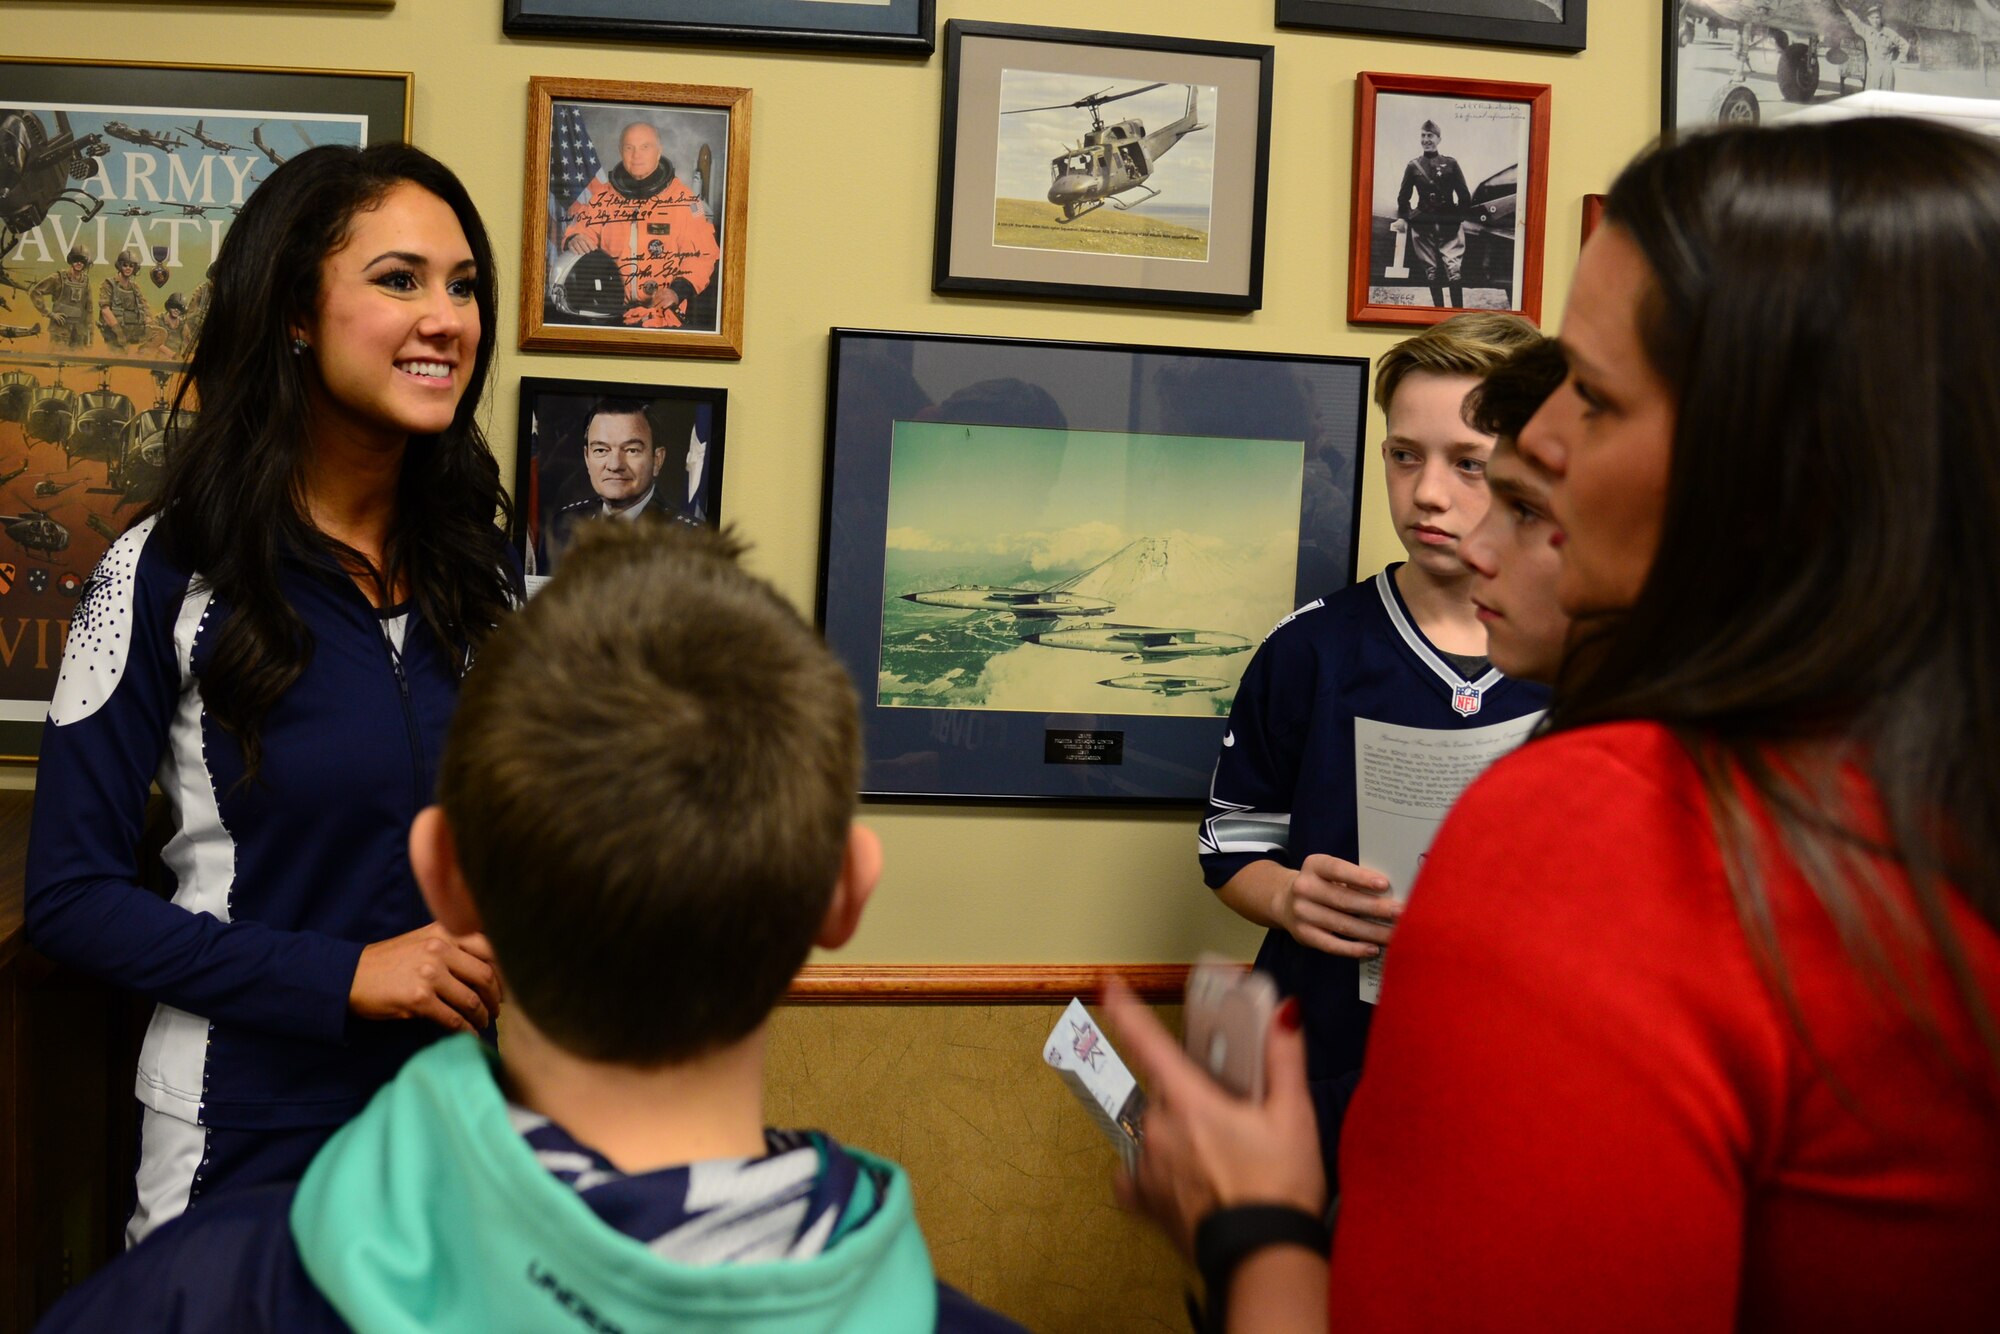 Dallas Cowboys Cheerleader Tess Guidry, speaks to families during a meet and greet Dec. 1, 2017, at Malmstrom Air Force Base, Mont.